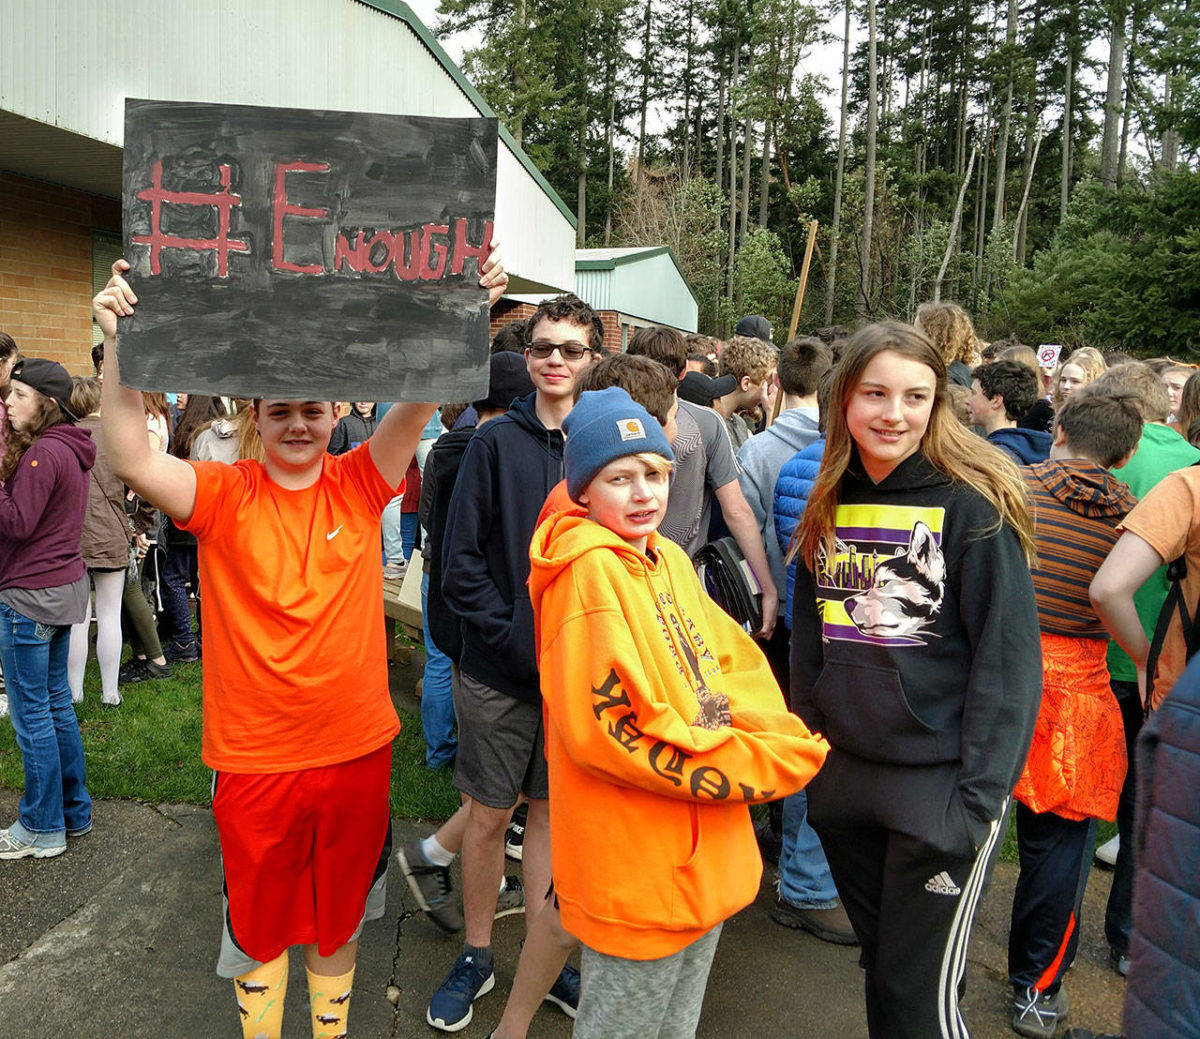 Student at McMurray Middle School on Vashon Island participated in Wednesday’s demonstration against gun violence. Photo by Susan Riemer